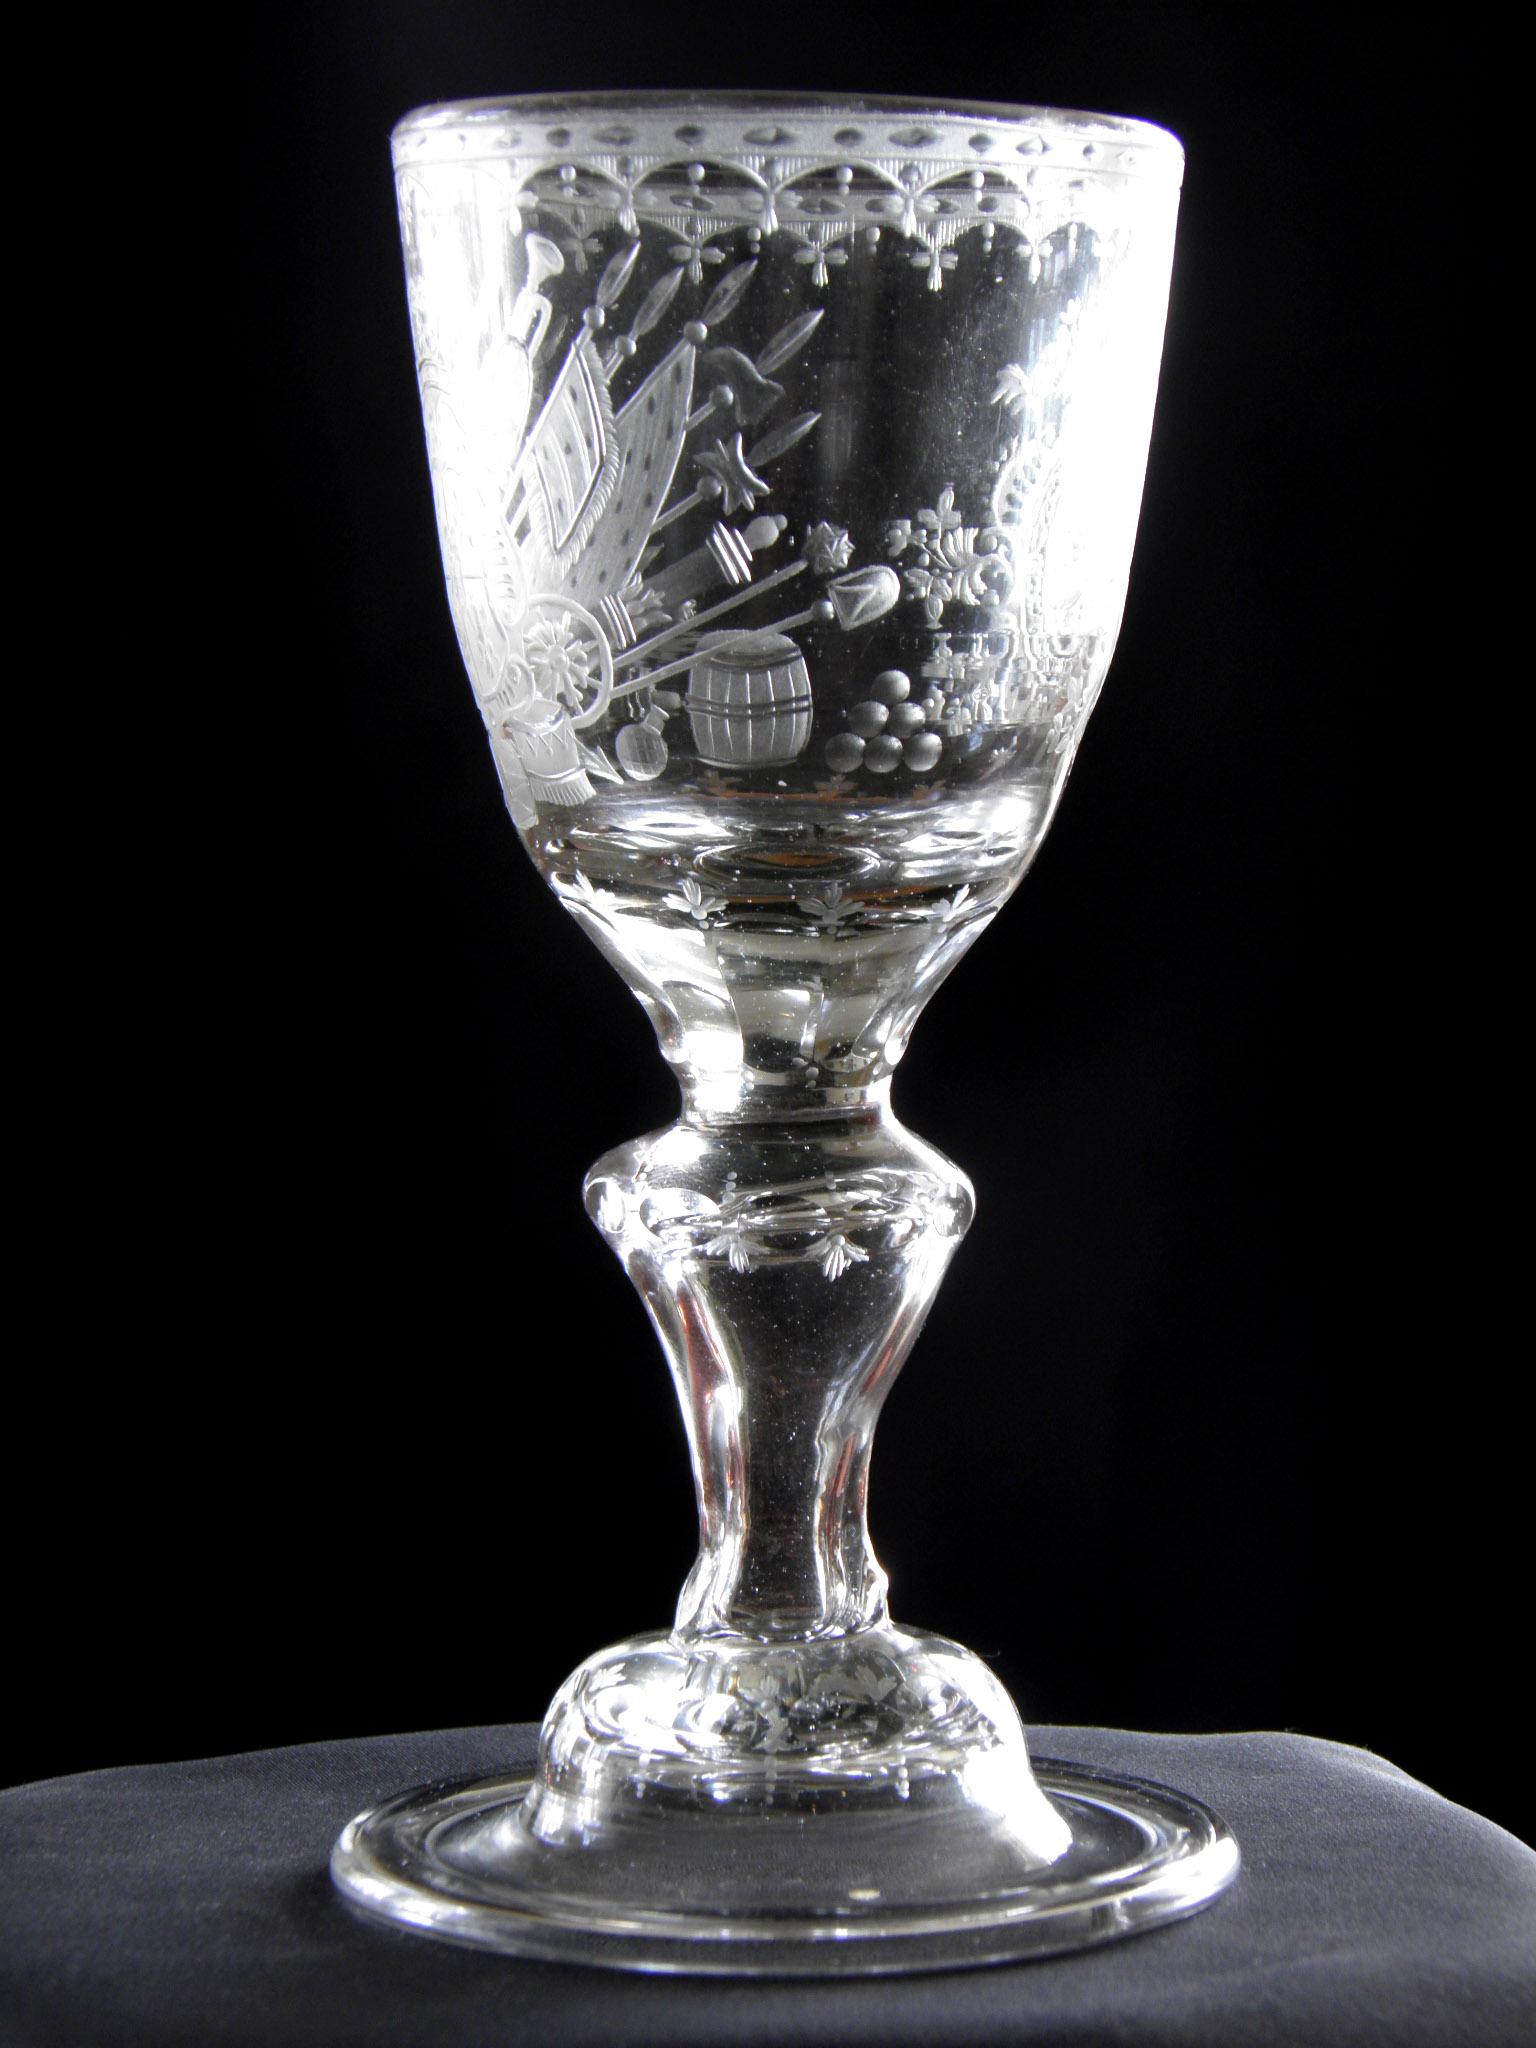 Antique historical crystal glass Goblet Augustus Rex 18th century
Historical hand blowed goblet from 18th century. Decorated with engraved emblem with army attributes and A.R. monogram (Augustus Rex). Engraving typical for 18th century. Beautiful